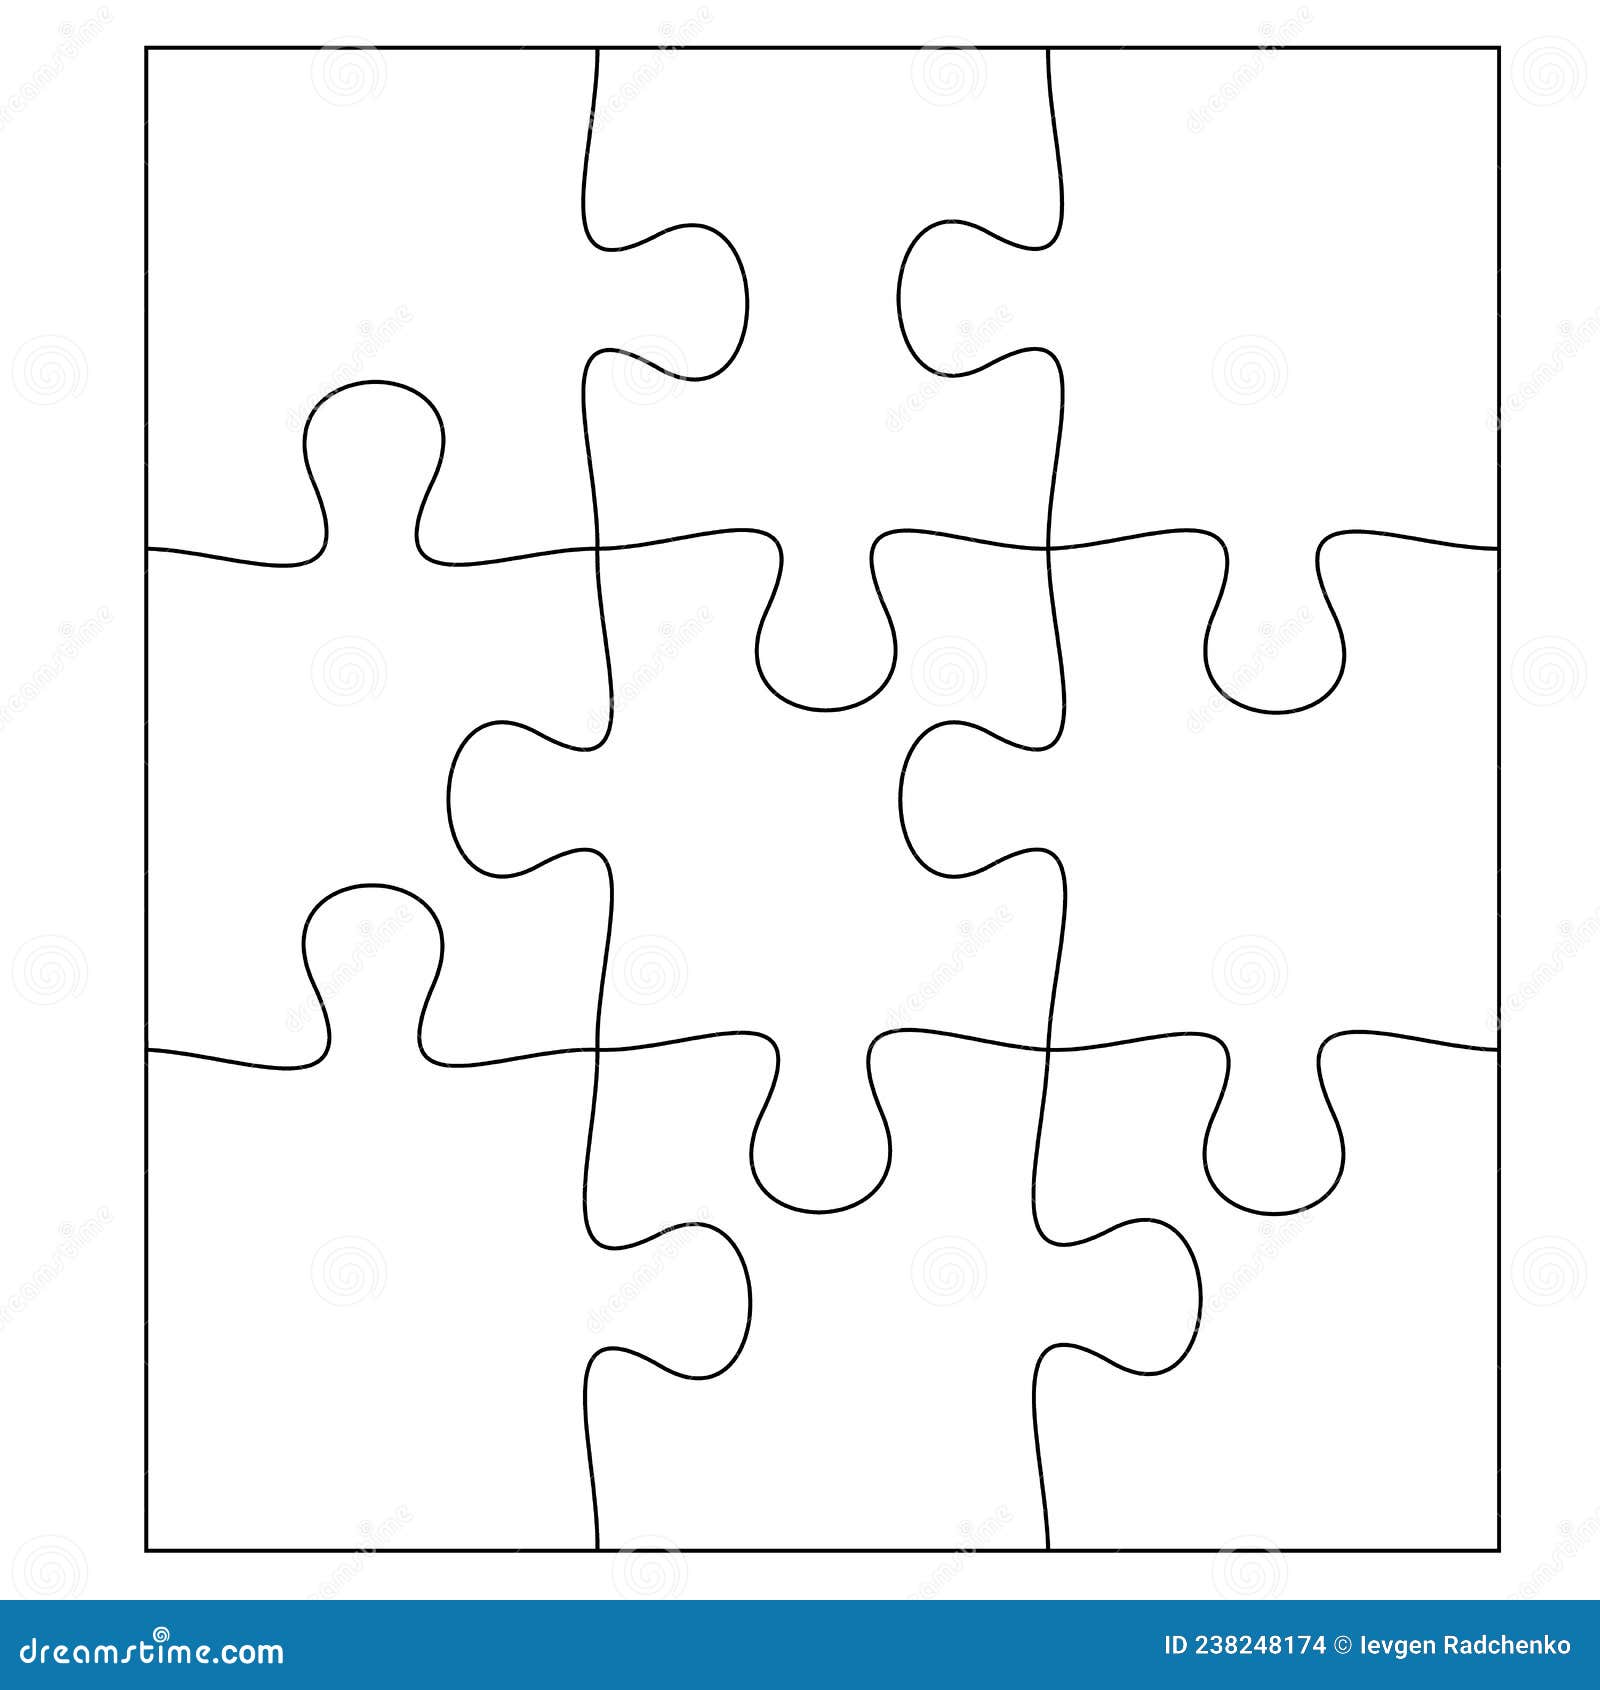 Blank Jigsaw Puzzle 9 Pieces. Simple Line Art Style for Printing and ...